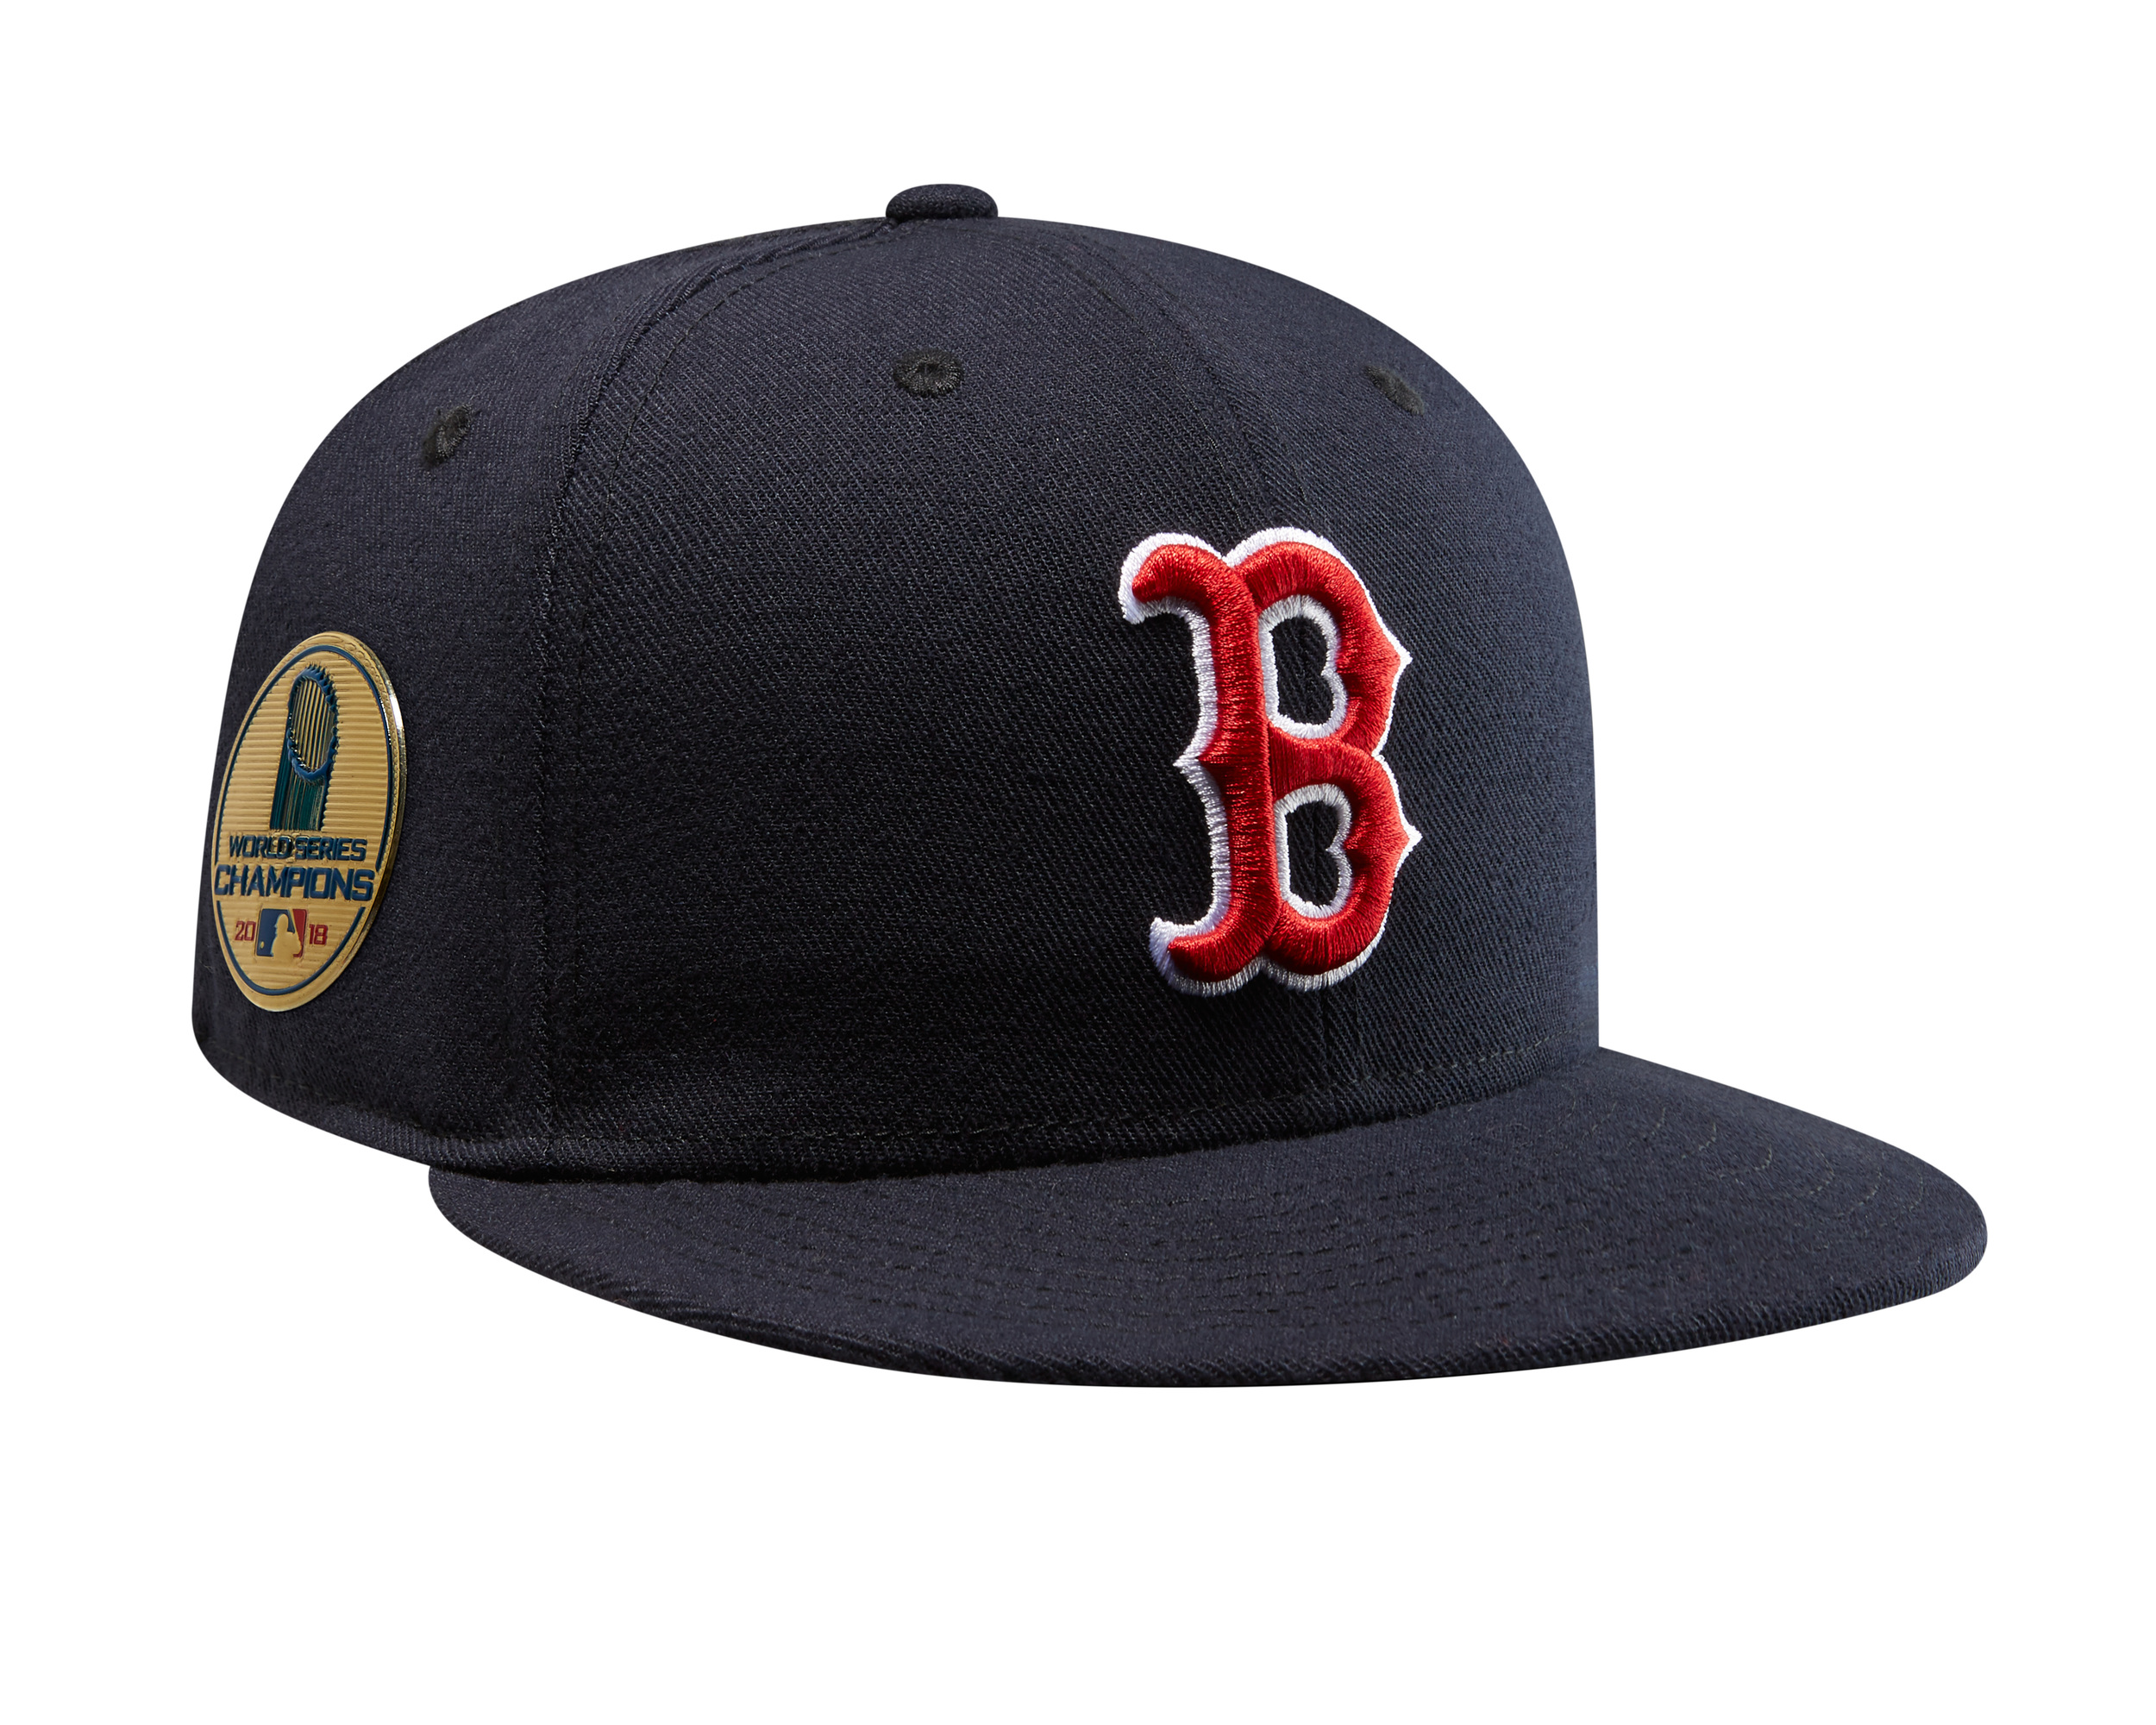 New Era Cap Drops Red Sox World Series Champion Collection with